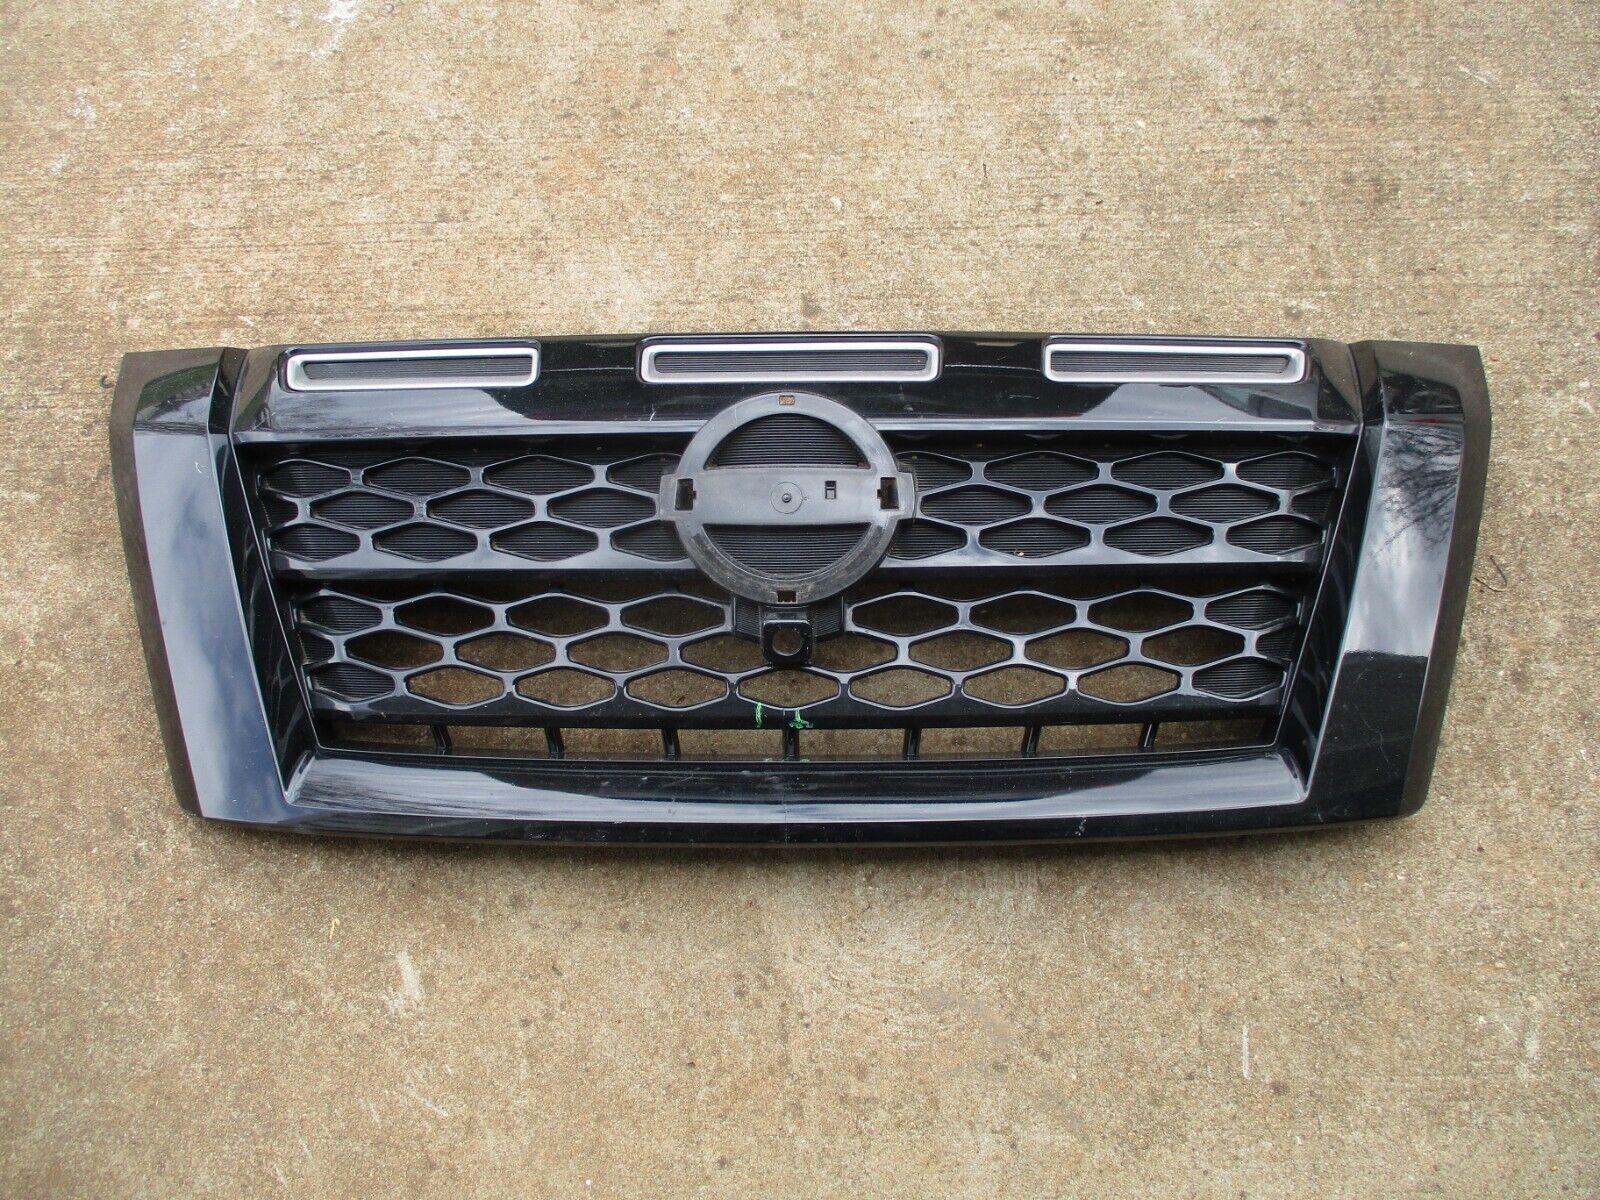 2022 2023 NISSAN PATHFINDER ROCK CREEK FRONT GRILLE GRILL OEM 62310 9A40A